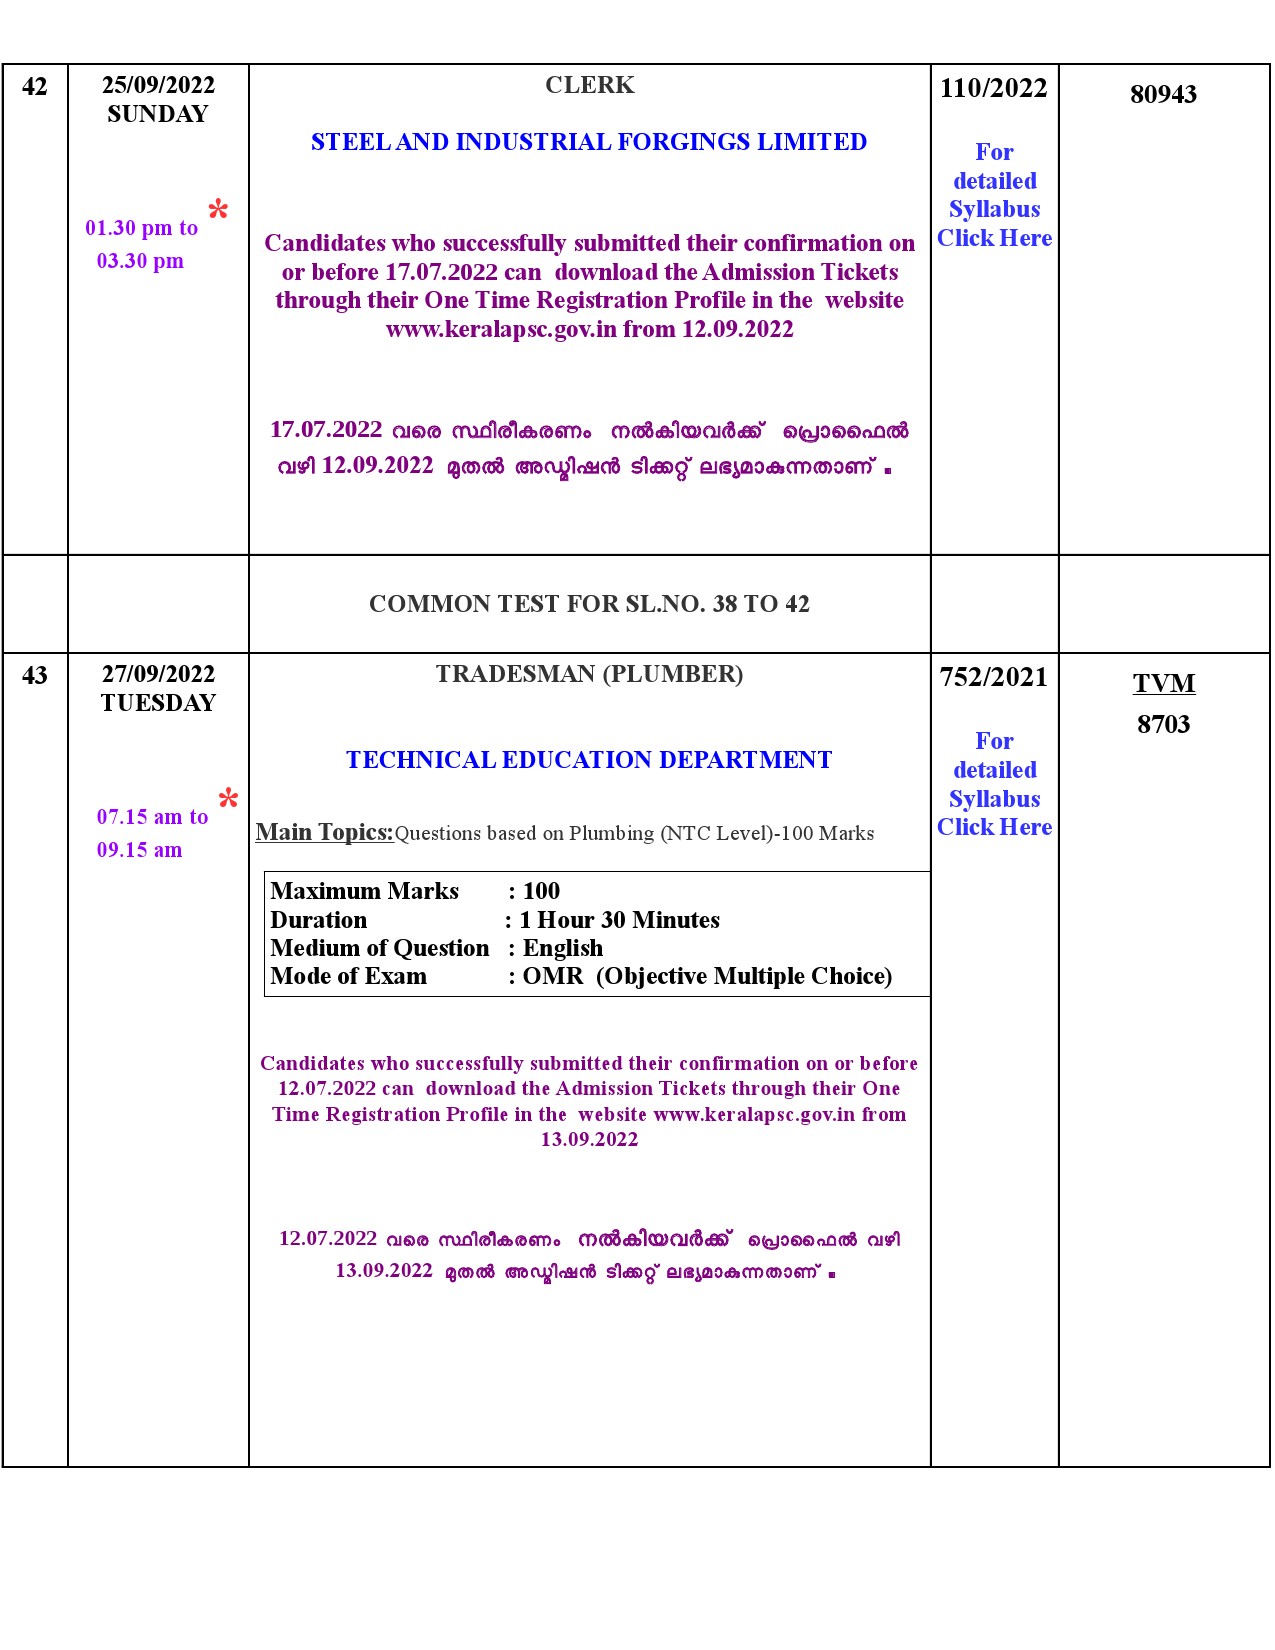 Examination Programme For The Month Of September 2022 - Notification Image 18